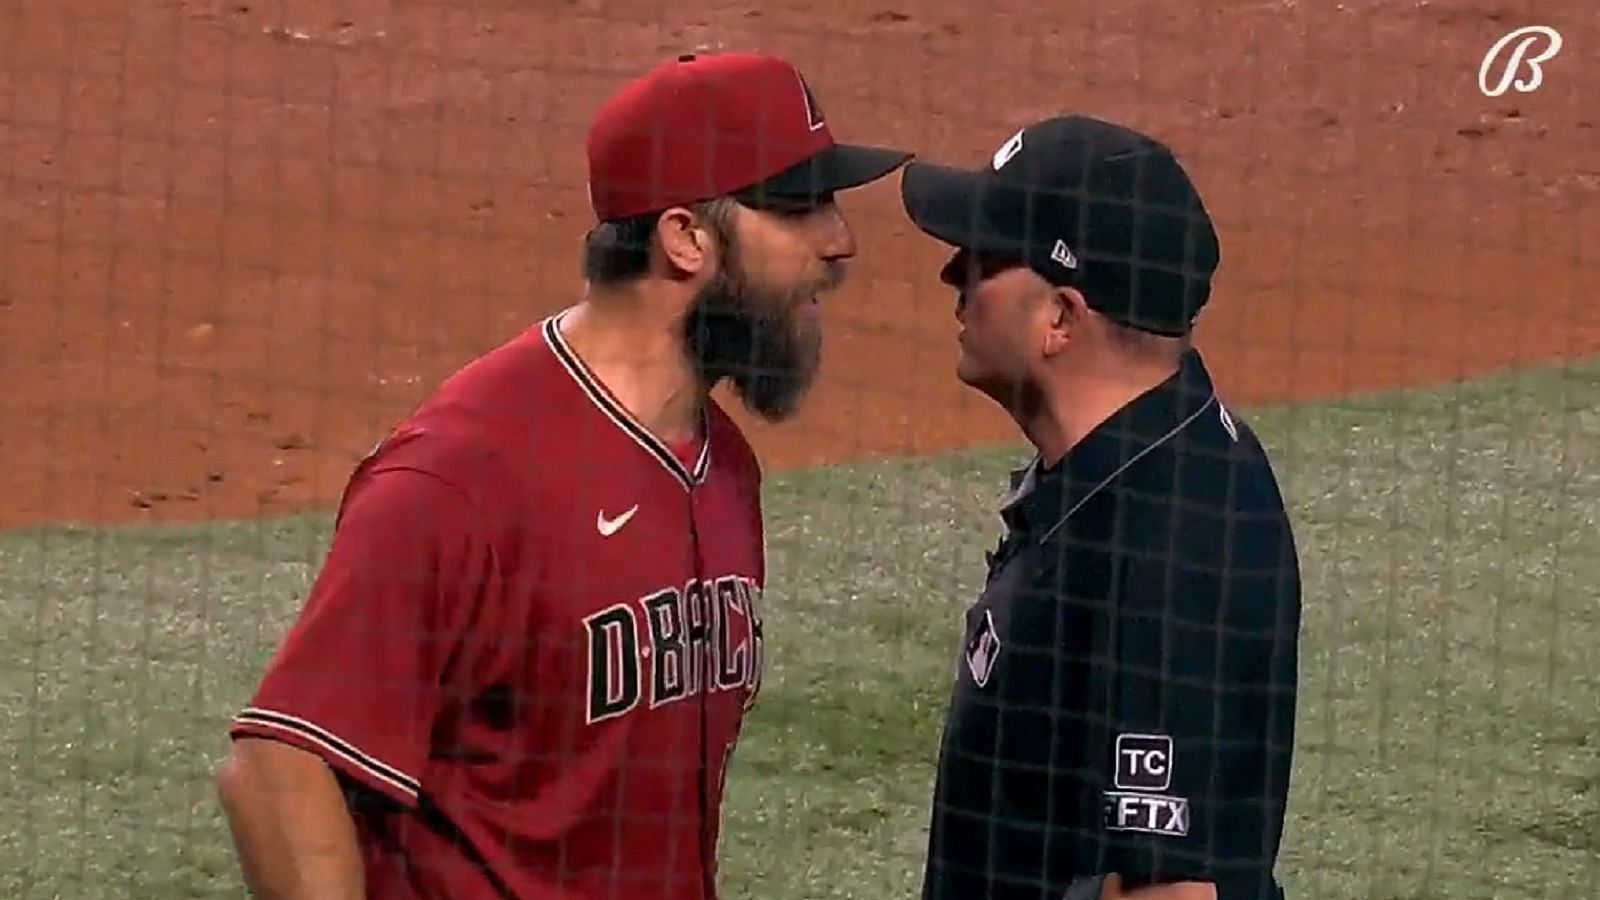 Madison Bumgarner and an umpire get into a heated altercation earlier this week. Bumgarner was later ejected from the game.